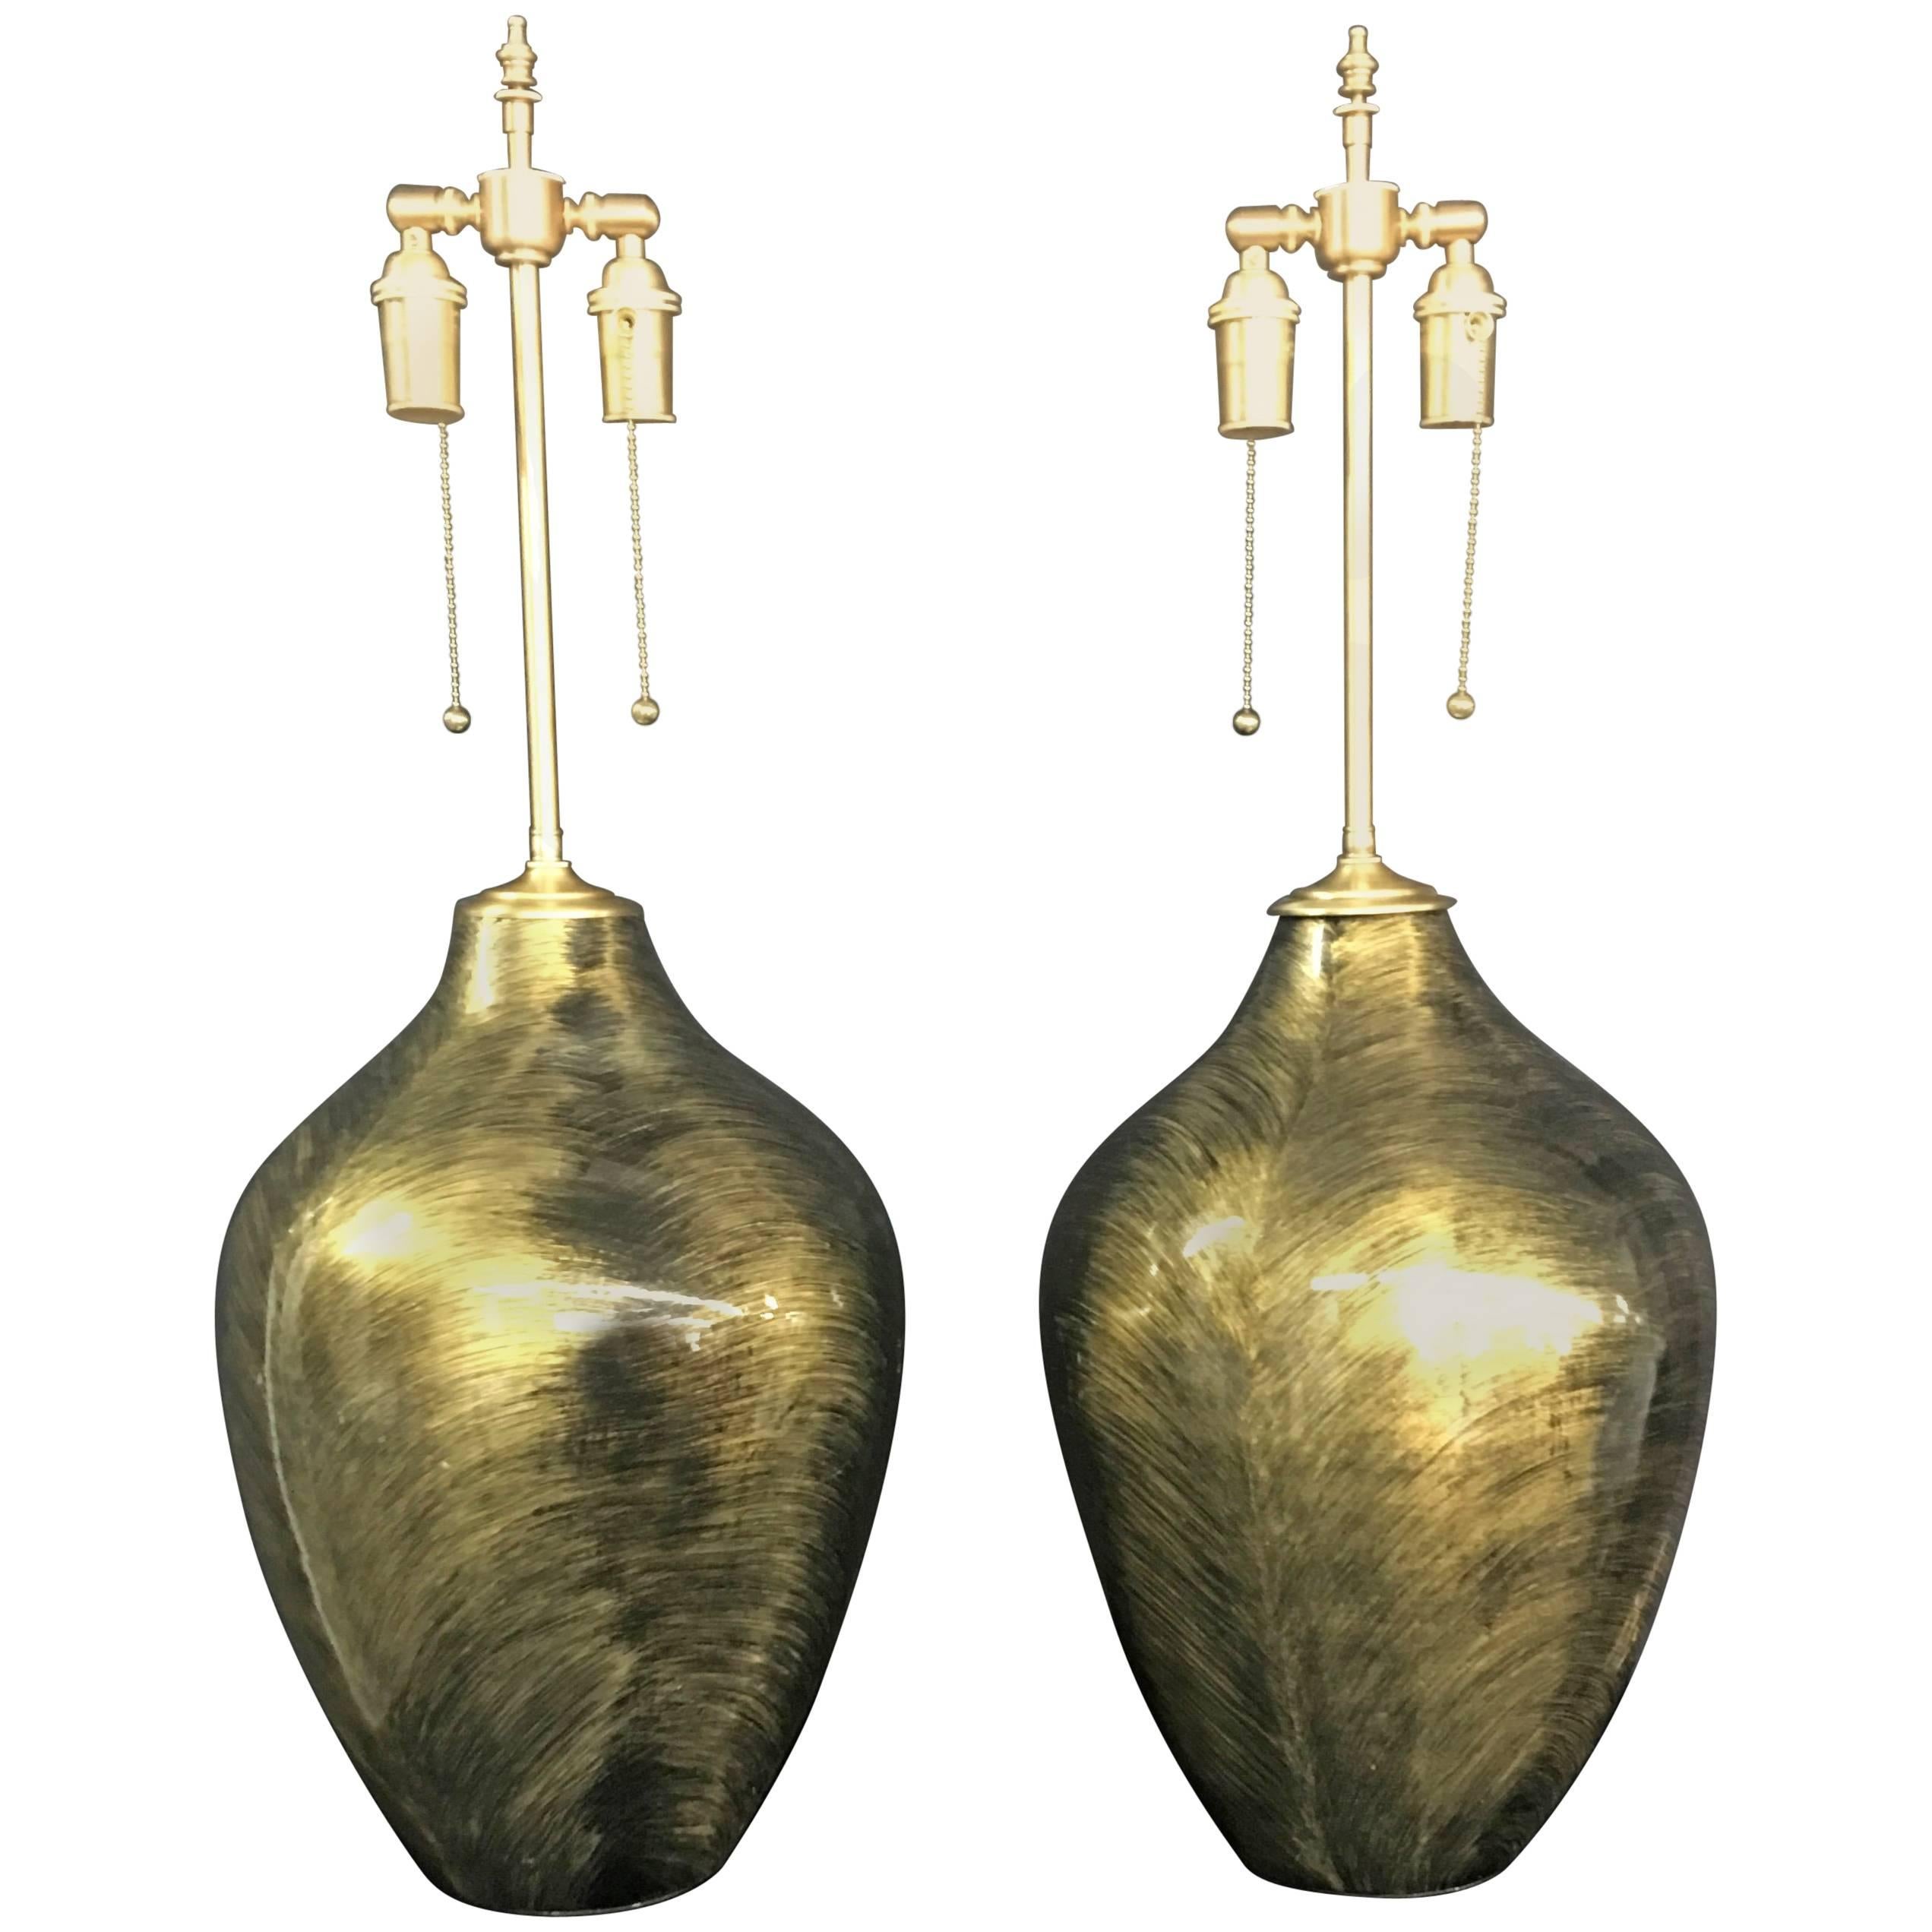 Pair of Luminescent Gold and Black Glazed Orbs with Lamp Application